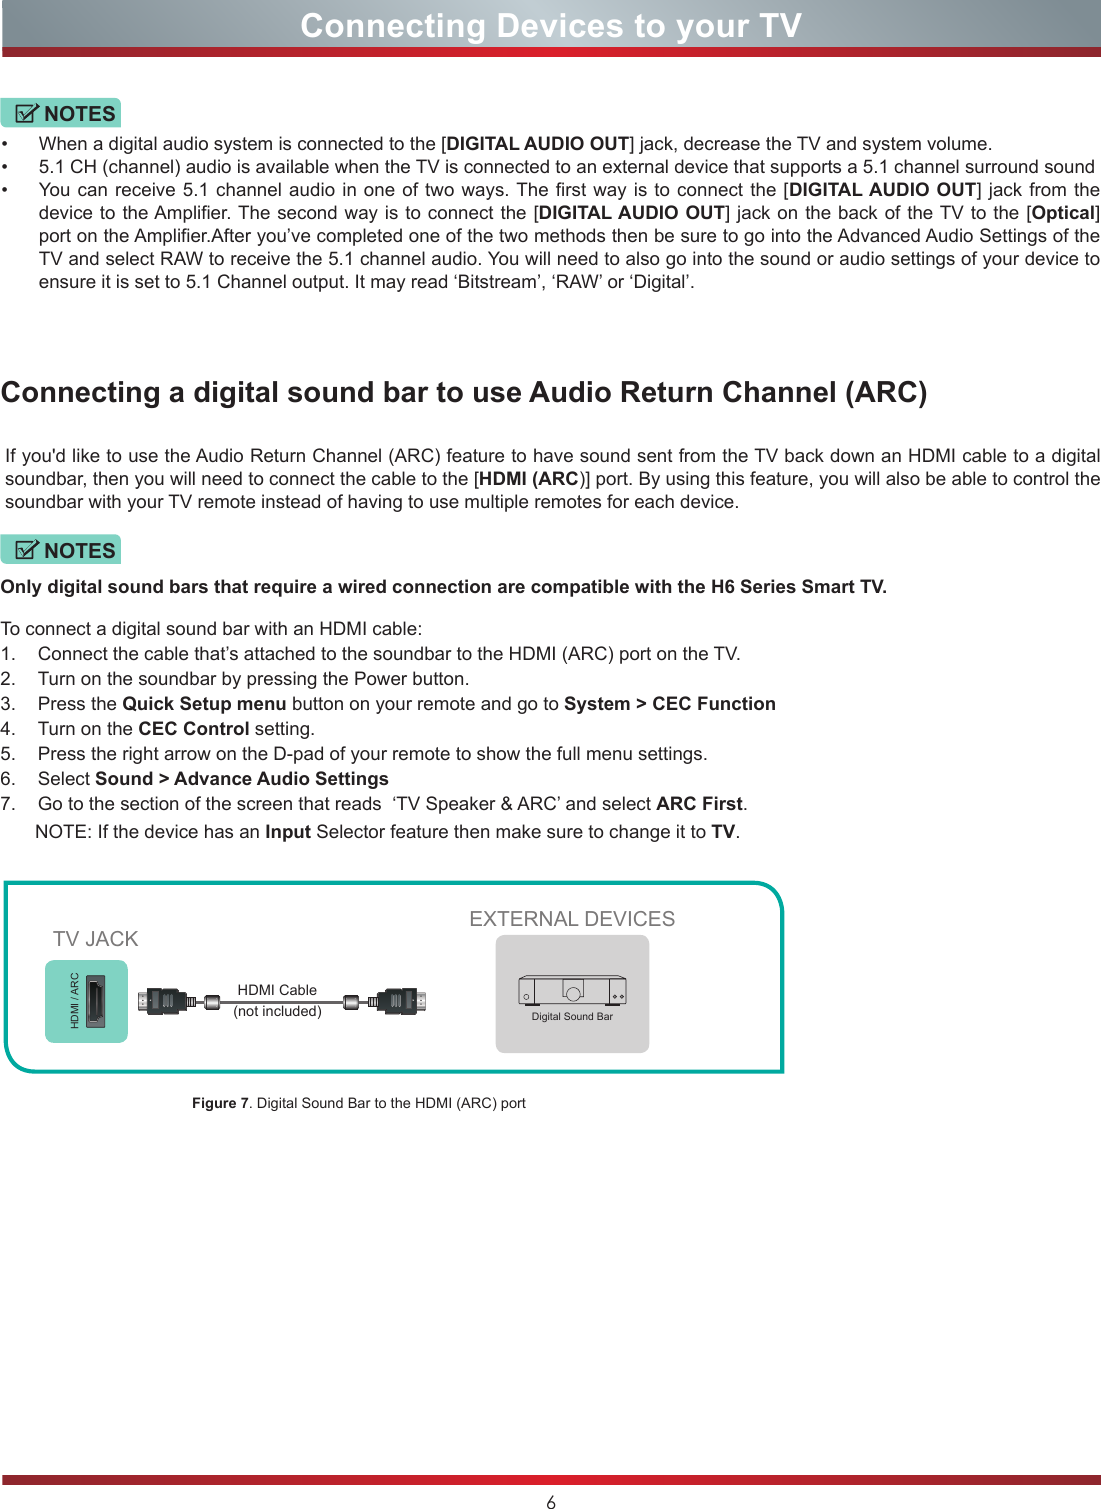 6Connecting Devices to your TVConnecting a digital sound bar to use Audio Return Channel (ARC)If you&apos;d like to use the Audio Return Channel (ARC) feature to have sound sent from the TV back down an HDMI cable to a digital soundbar, then you will need to connect the cable to the [HDMI (ARC)] port. By using this feature, you will also be able to control the soundbar with your TV remote instead of having to use multiple remotes for each device. • When a digital audio system is connected to the [DIGITAL AUDIO OUT] jack, decrease the TV and system volume. • 5.1 CH (channel) audio is available when the TV is connected to an external device that supports a 5.1 channel surround sound • You can receive 5.1 channel audio in one of two ways. The first way is to connect the [DIGITAL AUDIO OUT] jack from the device to the Amplifier. The second way is to connect the [DIGITAL AUDIO OUT] jack on the back of the TV to the [Optical] port on the Amplifier.After you’ve completed one of the two methods then be sure to go into the Advanced Audio Settings of the TV and select RAW to receive the 5.1 channel audio. You will need to also go into the sound or audio settings of your device to ensure it is set to 5.1 Channel output. It may read ‘Bitstream’, ‘RAW’ or ‘Digital’.Only digital sound bars that require a wired connection are compatible with the H6 Series Smart TV.To connect a digital sound bar with an HDMI cable:1.  Connect the cable that’s attached to the soundbar to the HDMI (ARC) port on the TV.2.  Turn on the soundbar by pressing the Power button.3.  Press the Quick Setup menu button on your remote and go to System &gt; CEC Function4.  Turn on the CEC Control setting.5.  Press the right arrow on the D-pad of your remote to show the full menu settings.6.  Select Sound &gt; Advance Audio Settings 7.  Go to the section of the screen that reads  ‘TV Speaker &amp; ARC’ and select ARC First.Figure 7. Digital Sound Bar to the HDMI (ARC) port NOTESNOTESEXTERNAL DEVICESDigital Sound BarHDMI / ARCTV JACKHDMI Cable (not included)NOTE: If the device has an Input Selector feature then make sure to change it to TV.